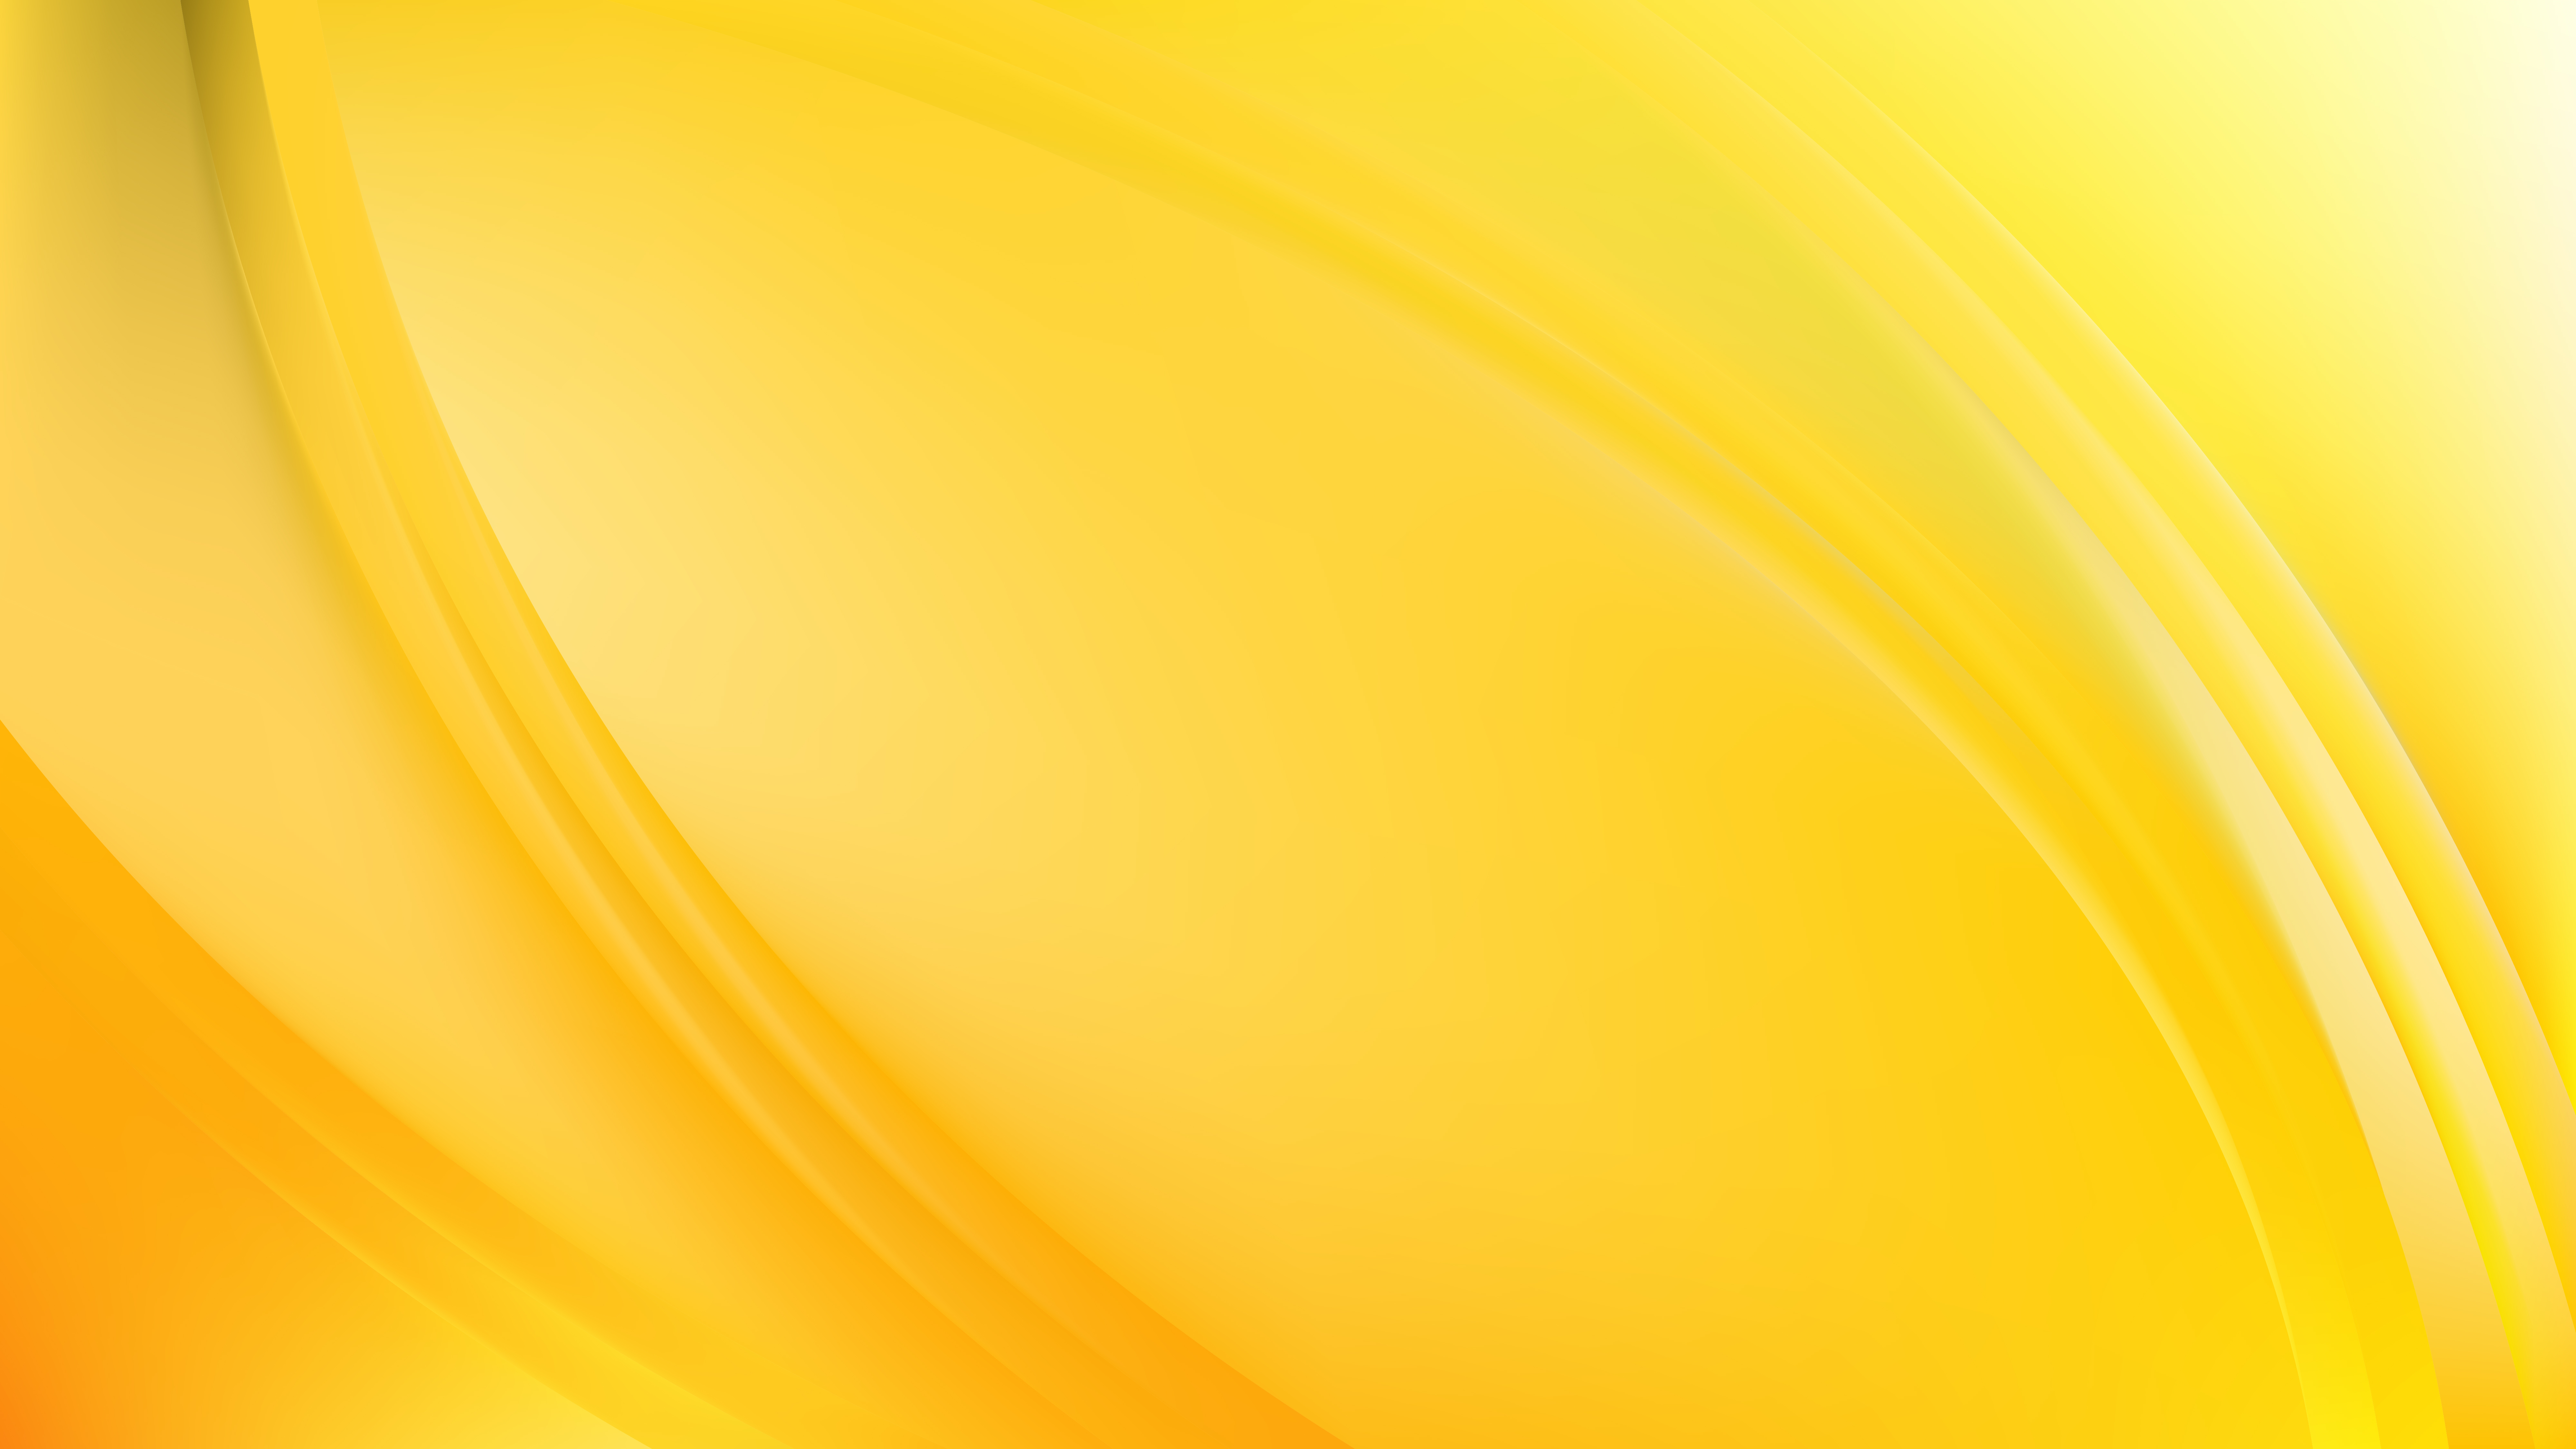 Free Glowing Yellow Wave Background Graphic